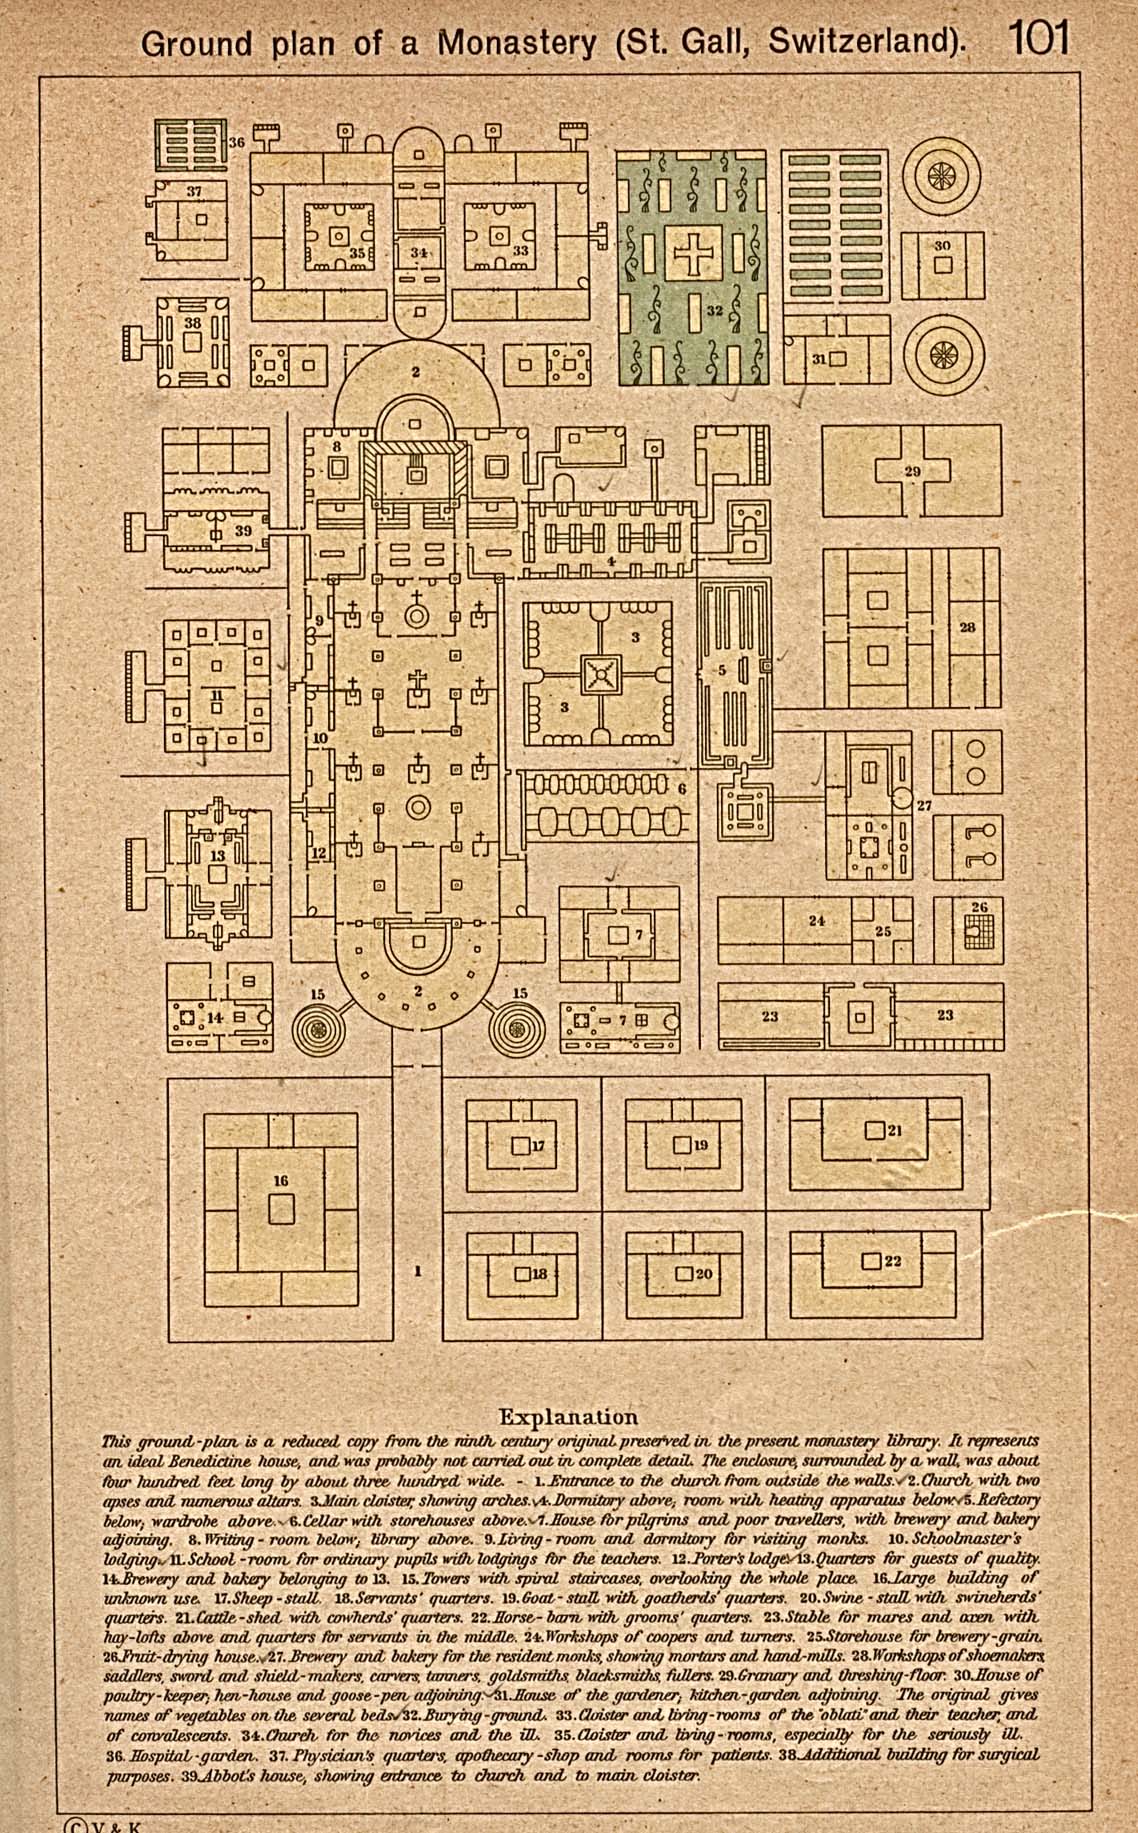 Historical Maps of Europe. Ground Plan of a Monastery (St.Gall, Switzerland) (516K) From The Historical Atlas by William R. Shepherd, 1923. 